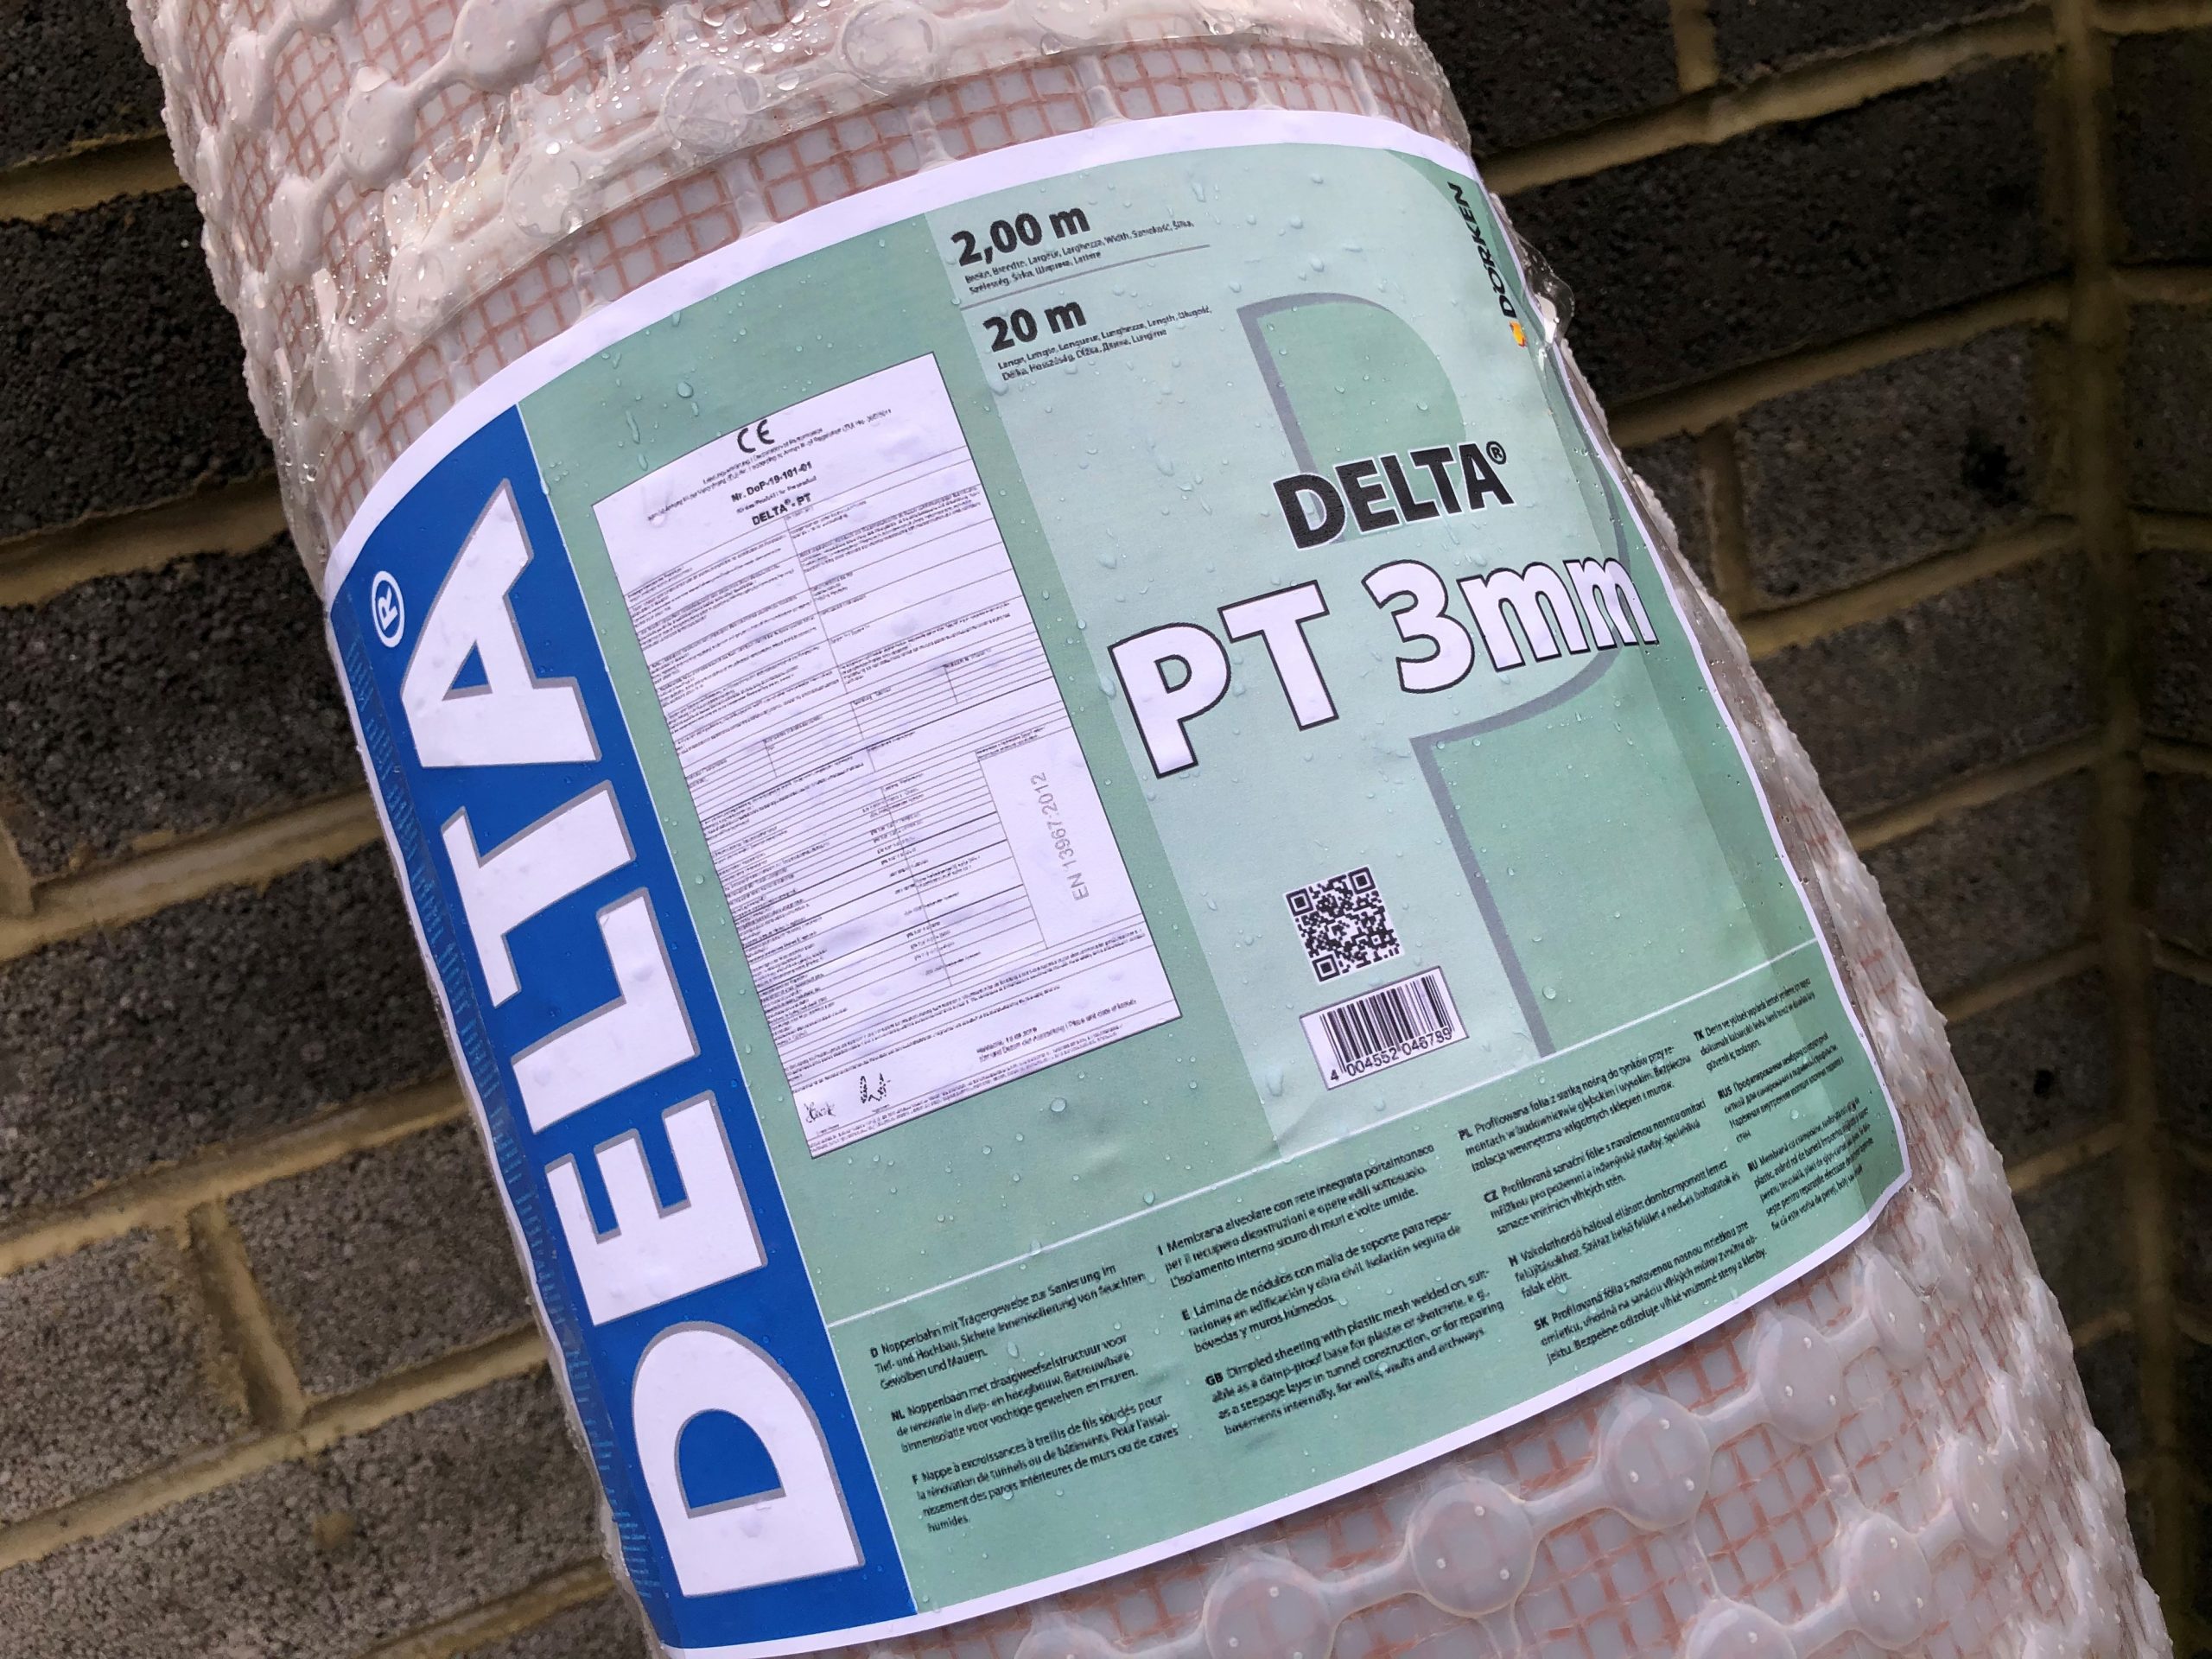 Quality in Construction – New product Development from Leaders in the Waterproofing Industry, Delta Membranes @DeltaMembranes